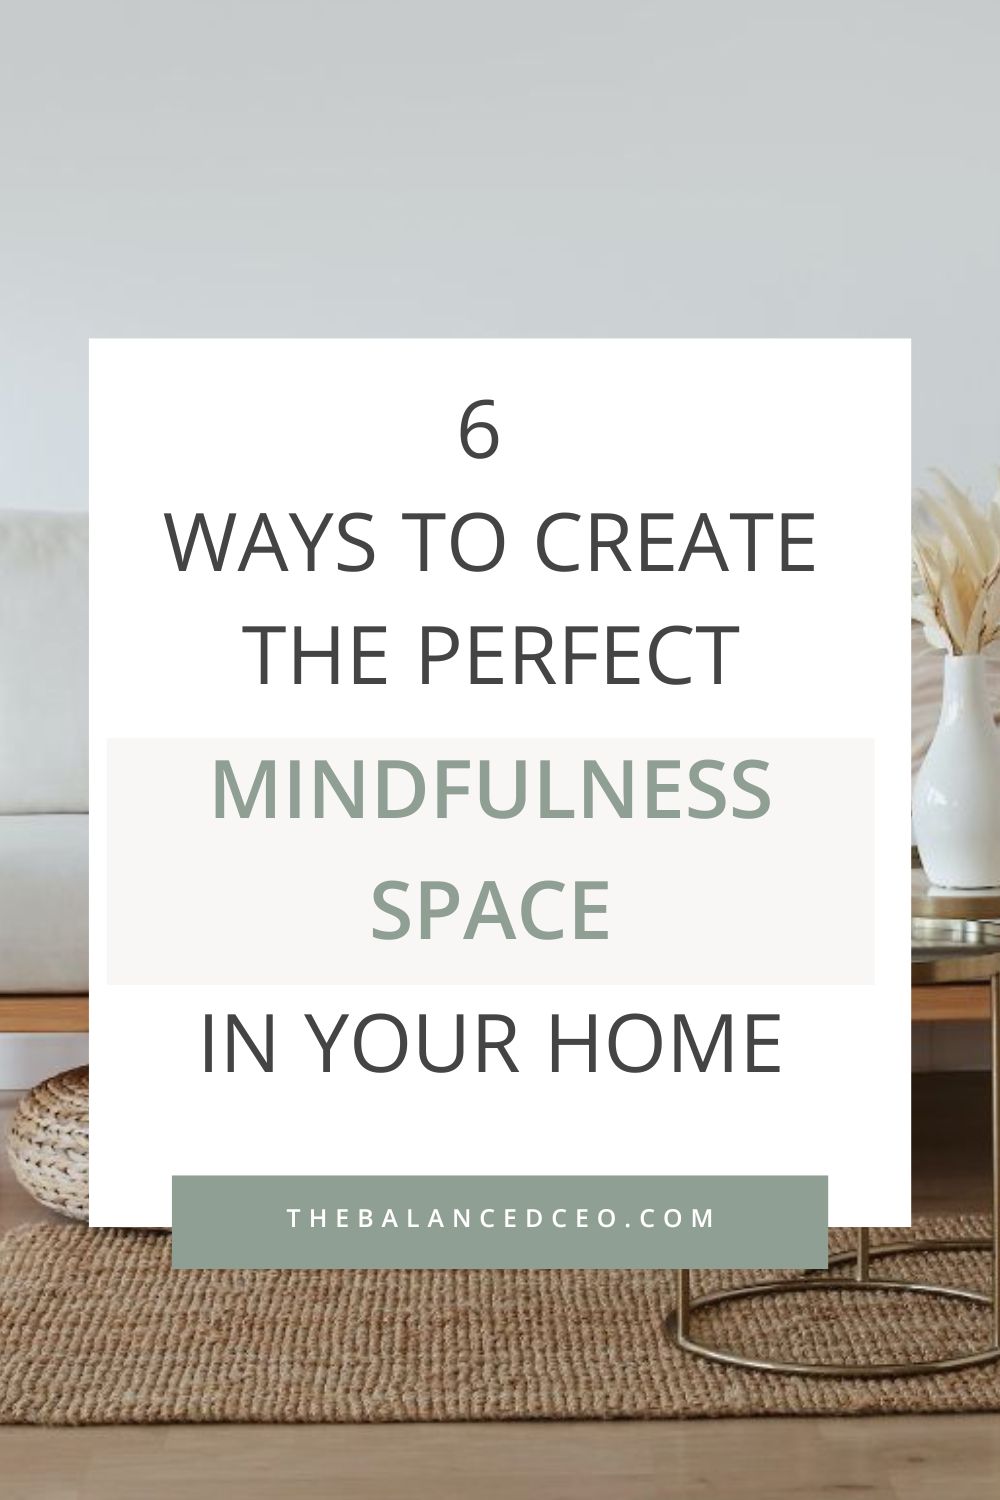 7 Ways to Create the Perfect Mindfulness Space in Your Home